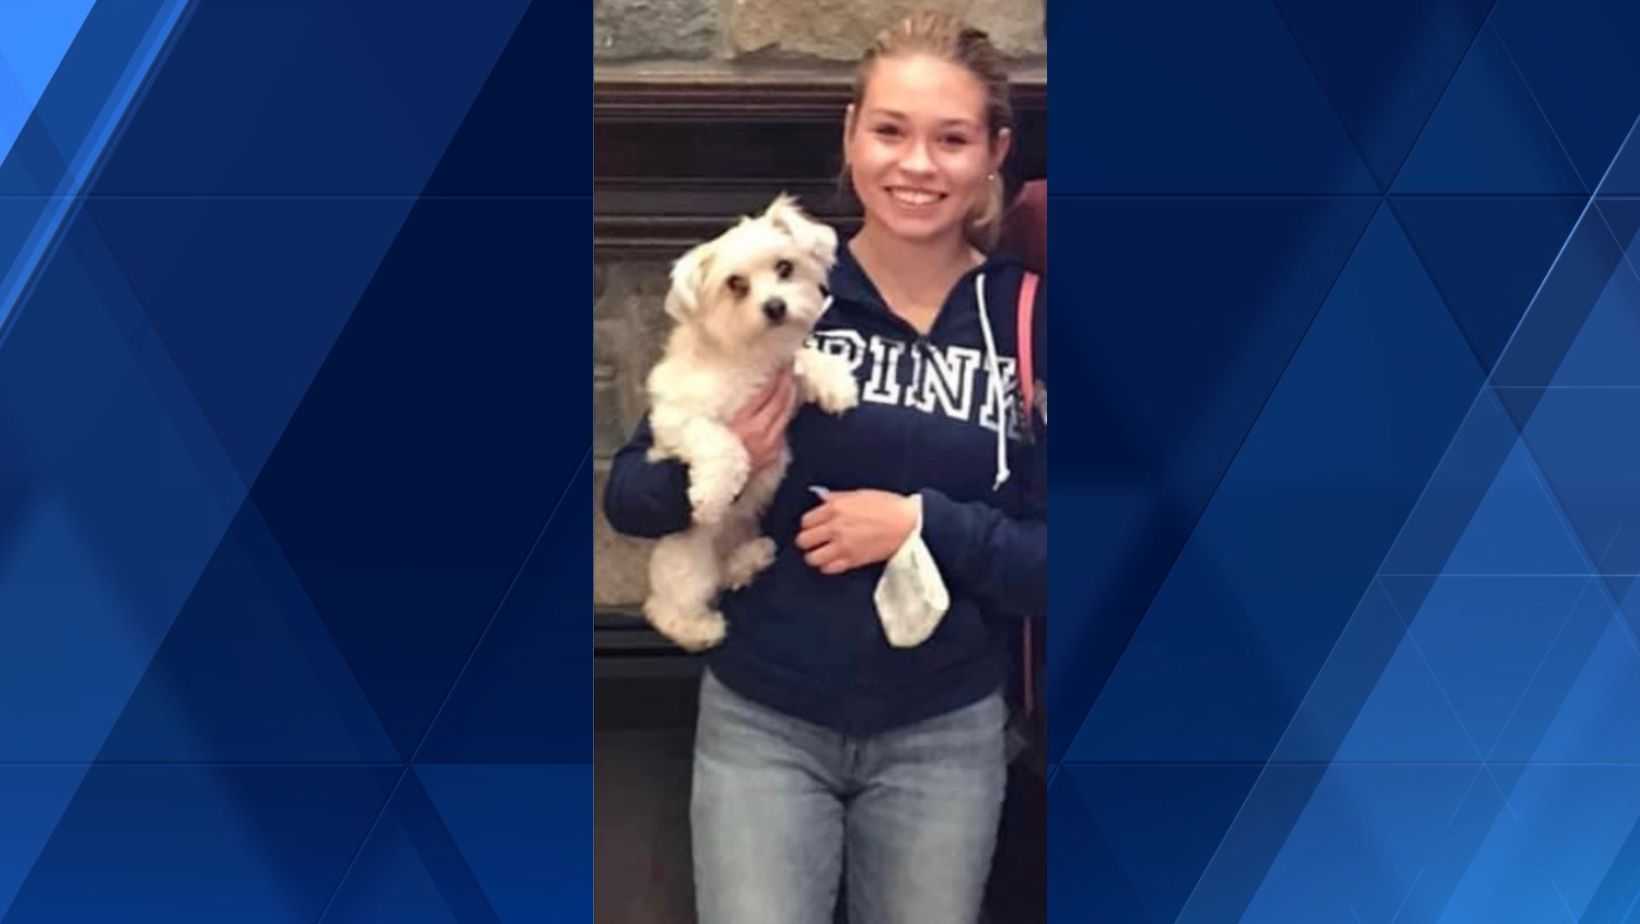 Golden Alert issued for missing 18-year-old girl from northern Kentucky